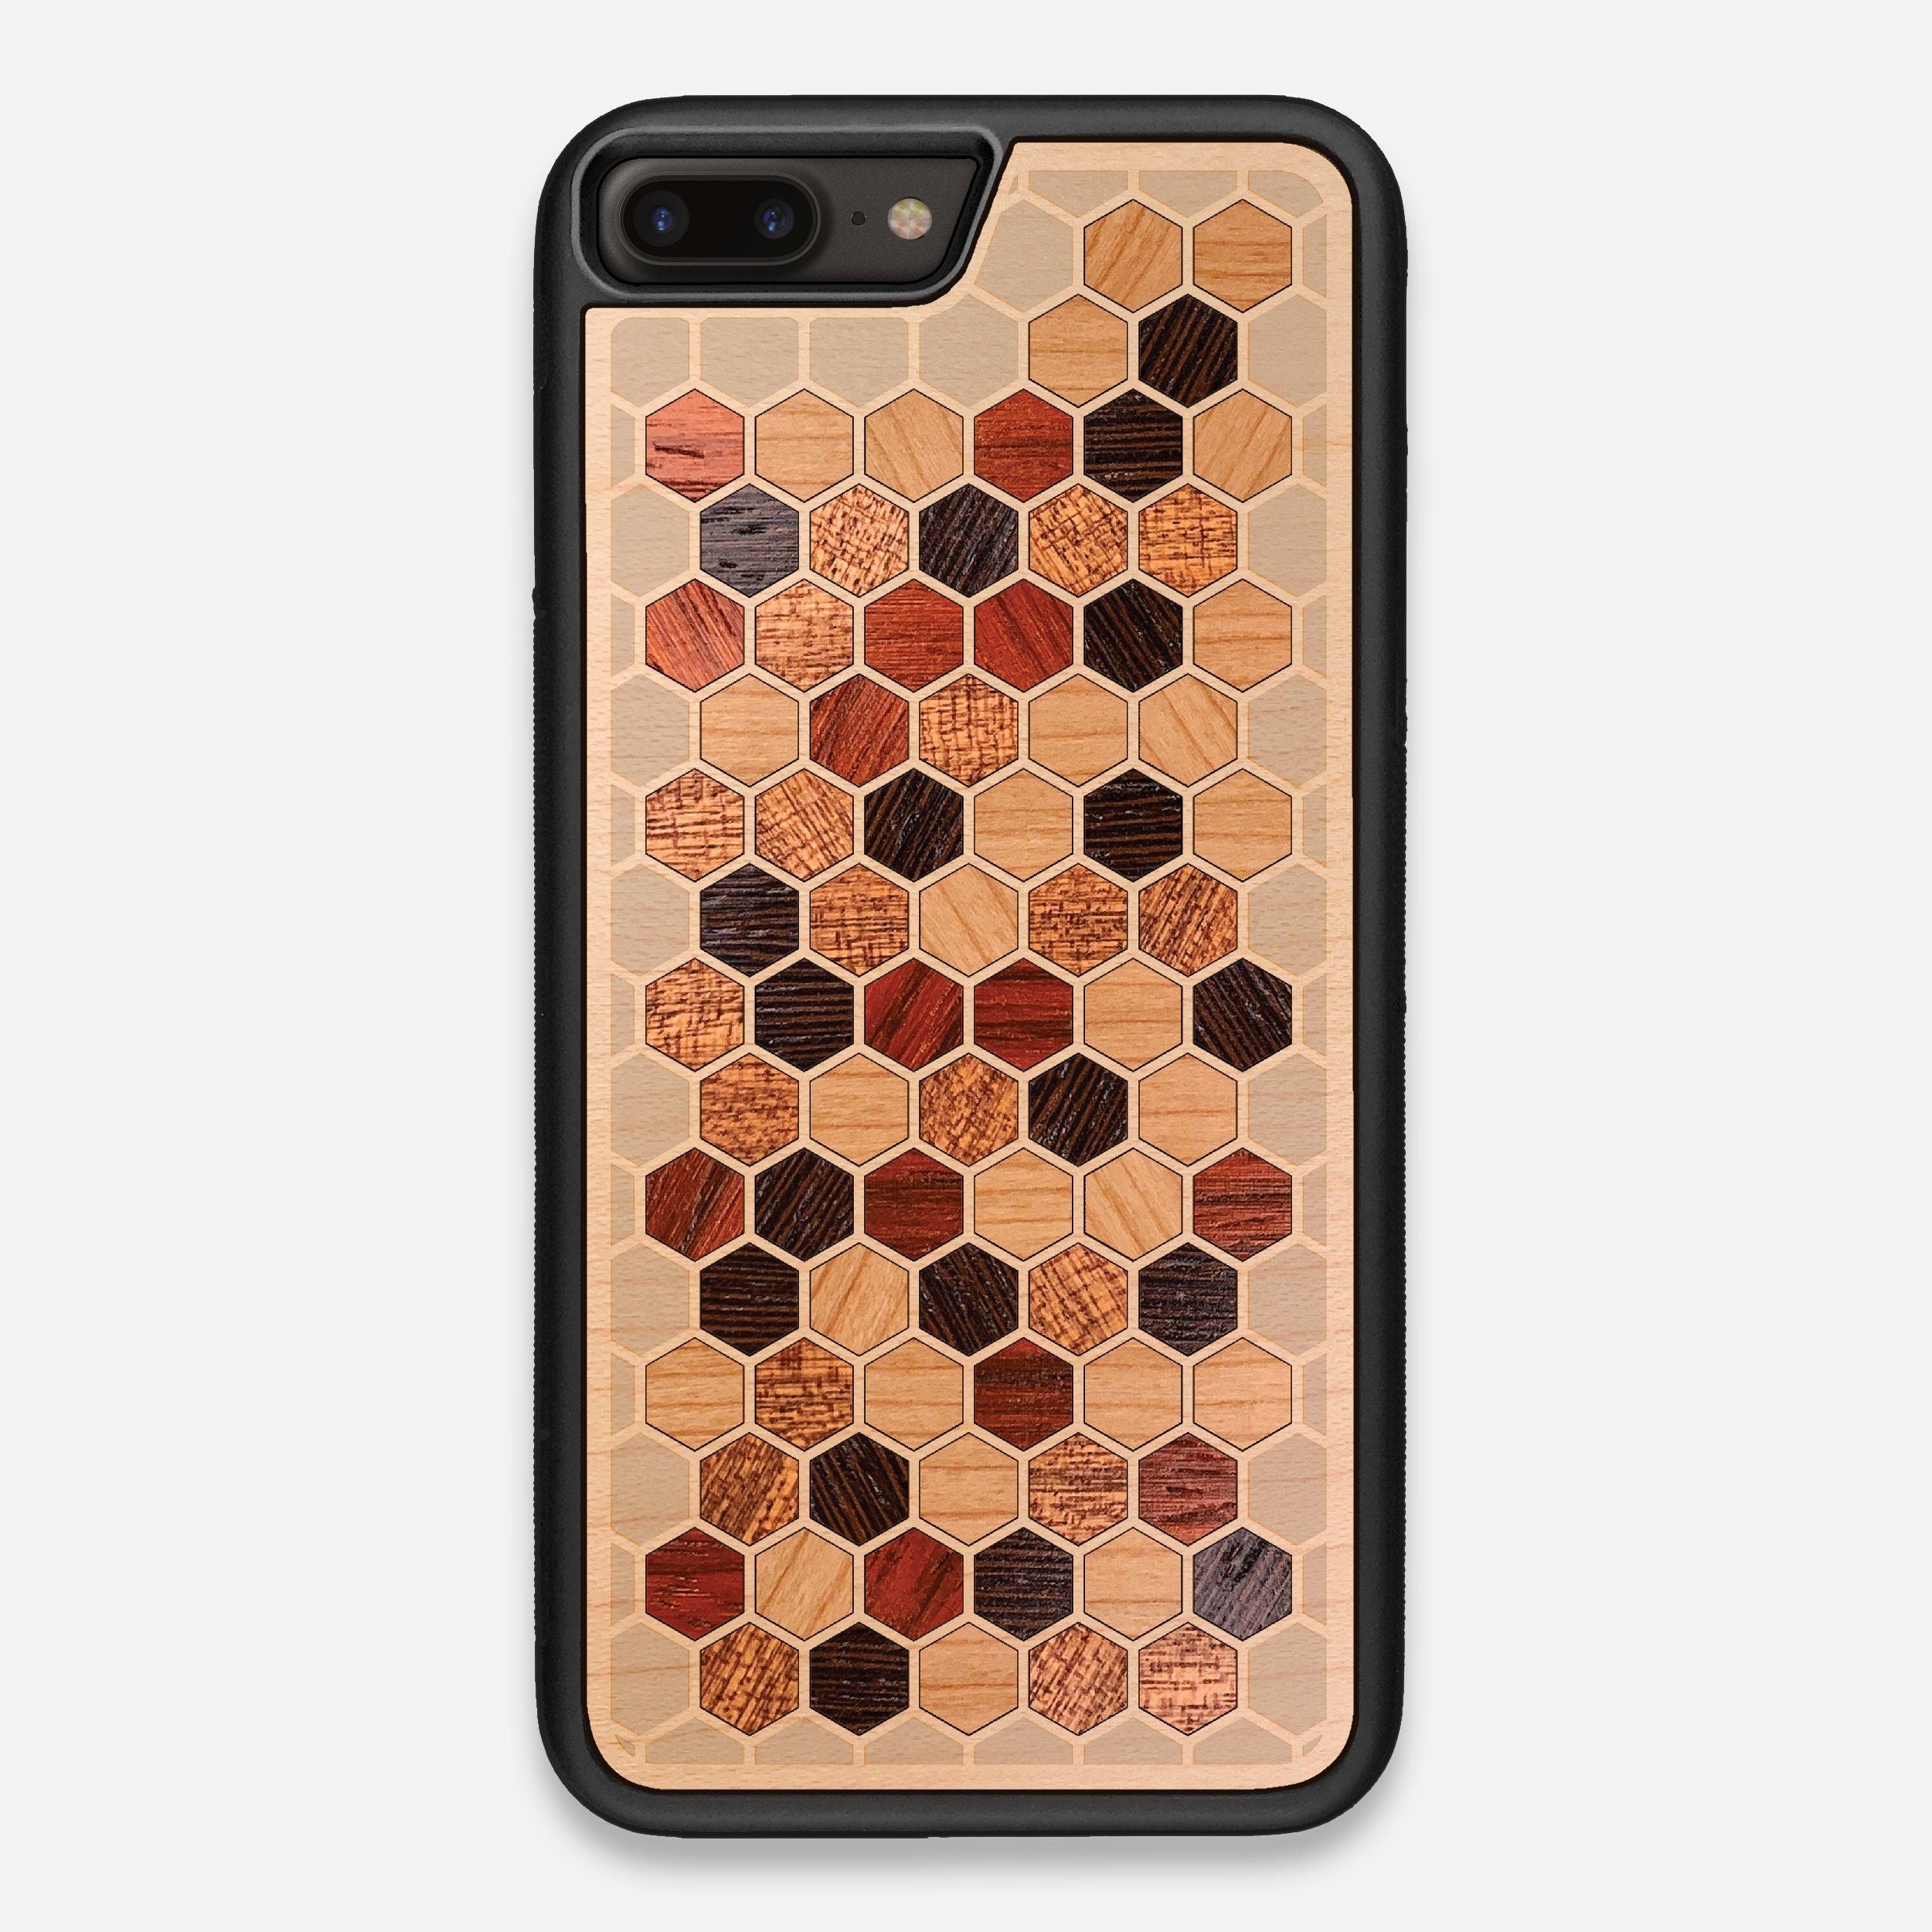 Front view of the Cellular Maple Wood iPhone 7/8 Plus Case by Keyway Designs